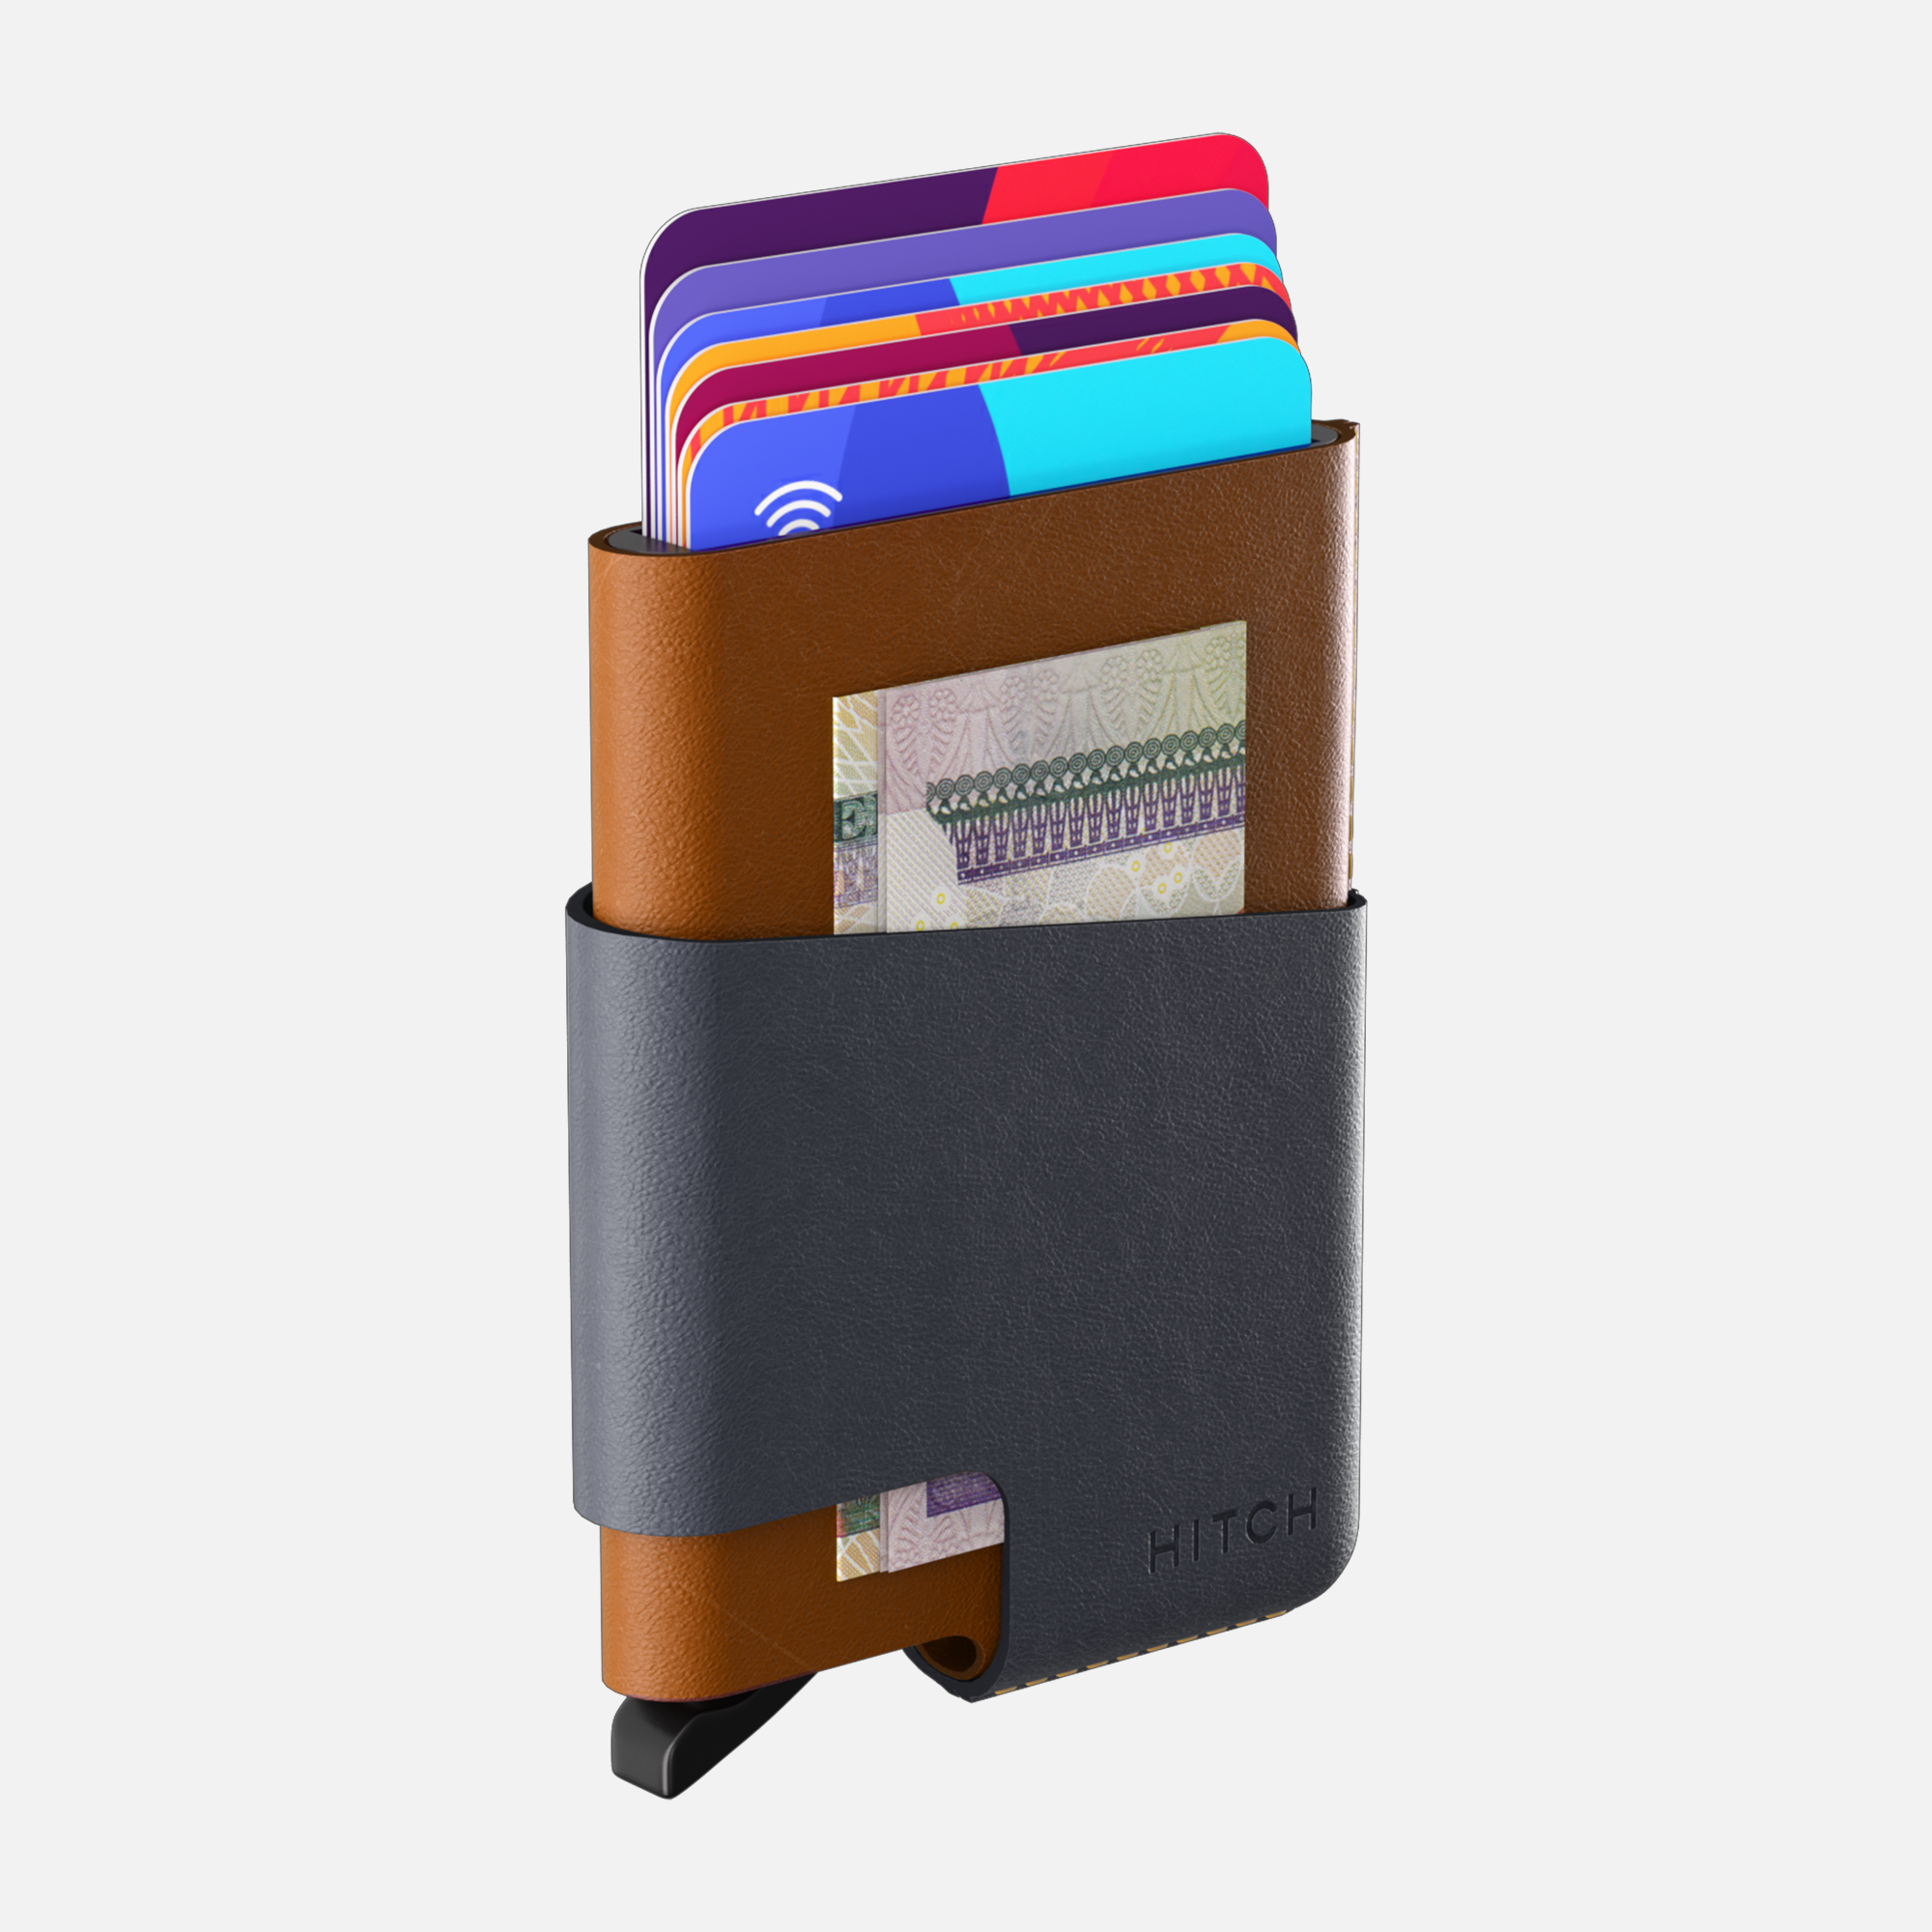 CUT-OUT Cardholder - RFID Block Featured - Handmade Natural Genuine Leather - Havan-Blue Gray